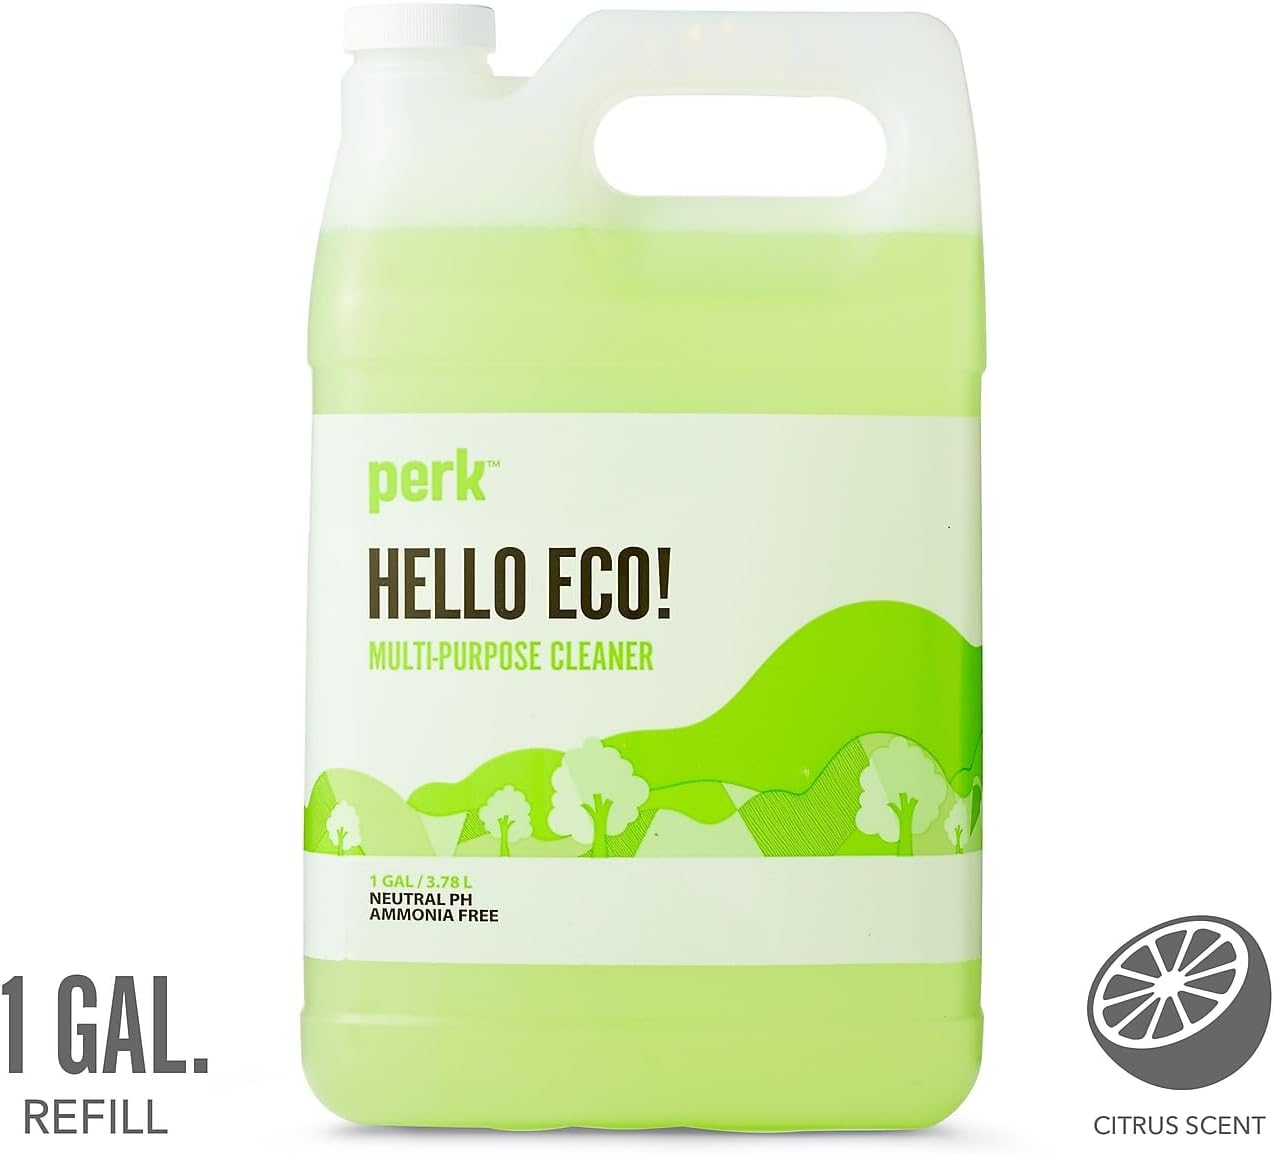 Sustainable Earth Cleaner Review